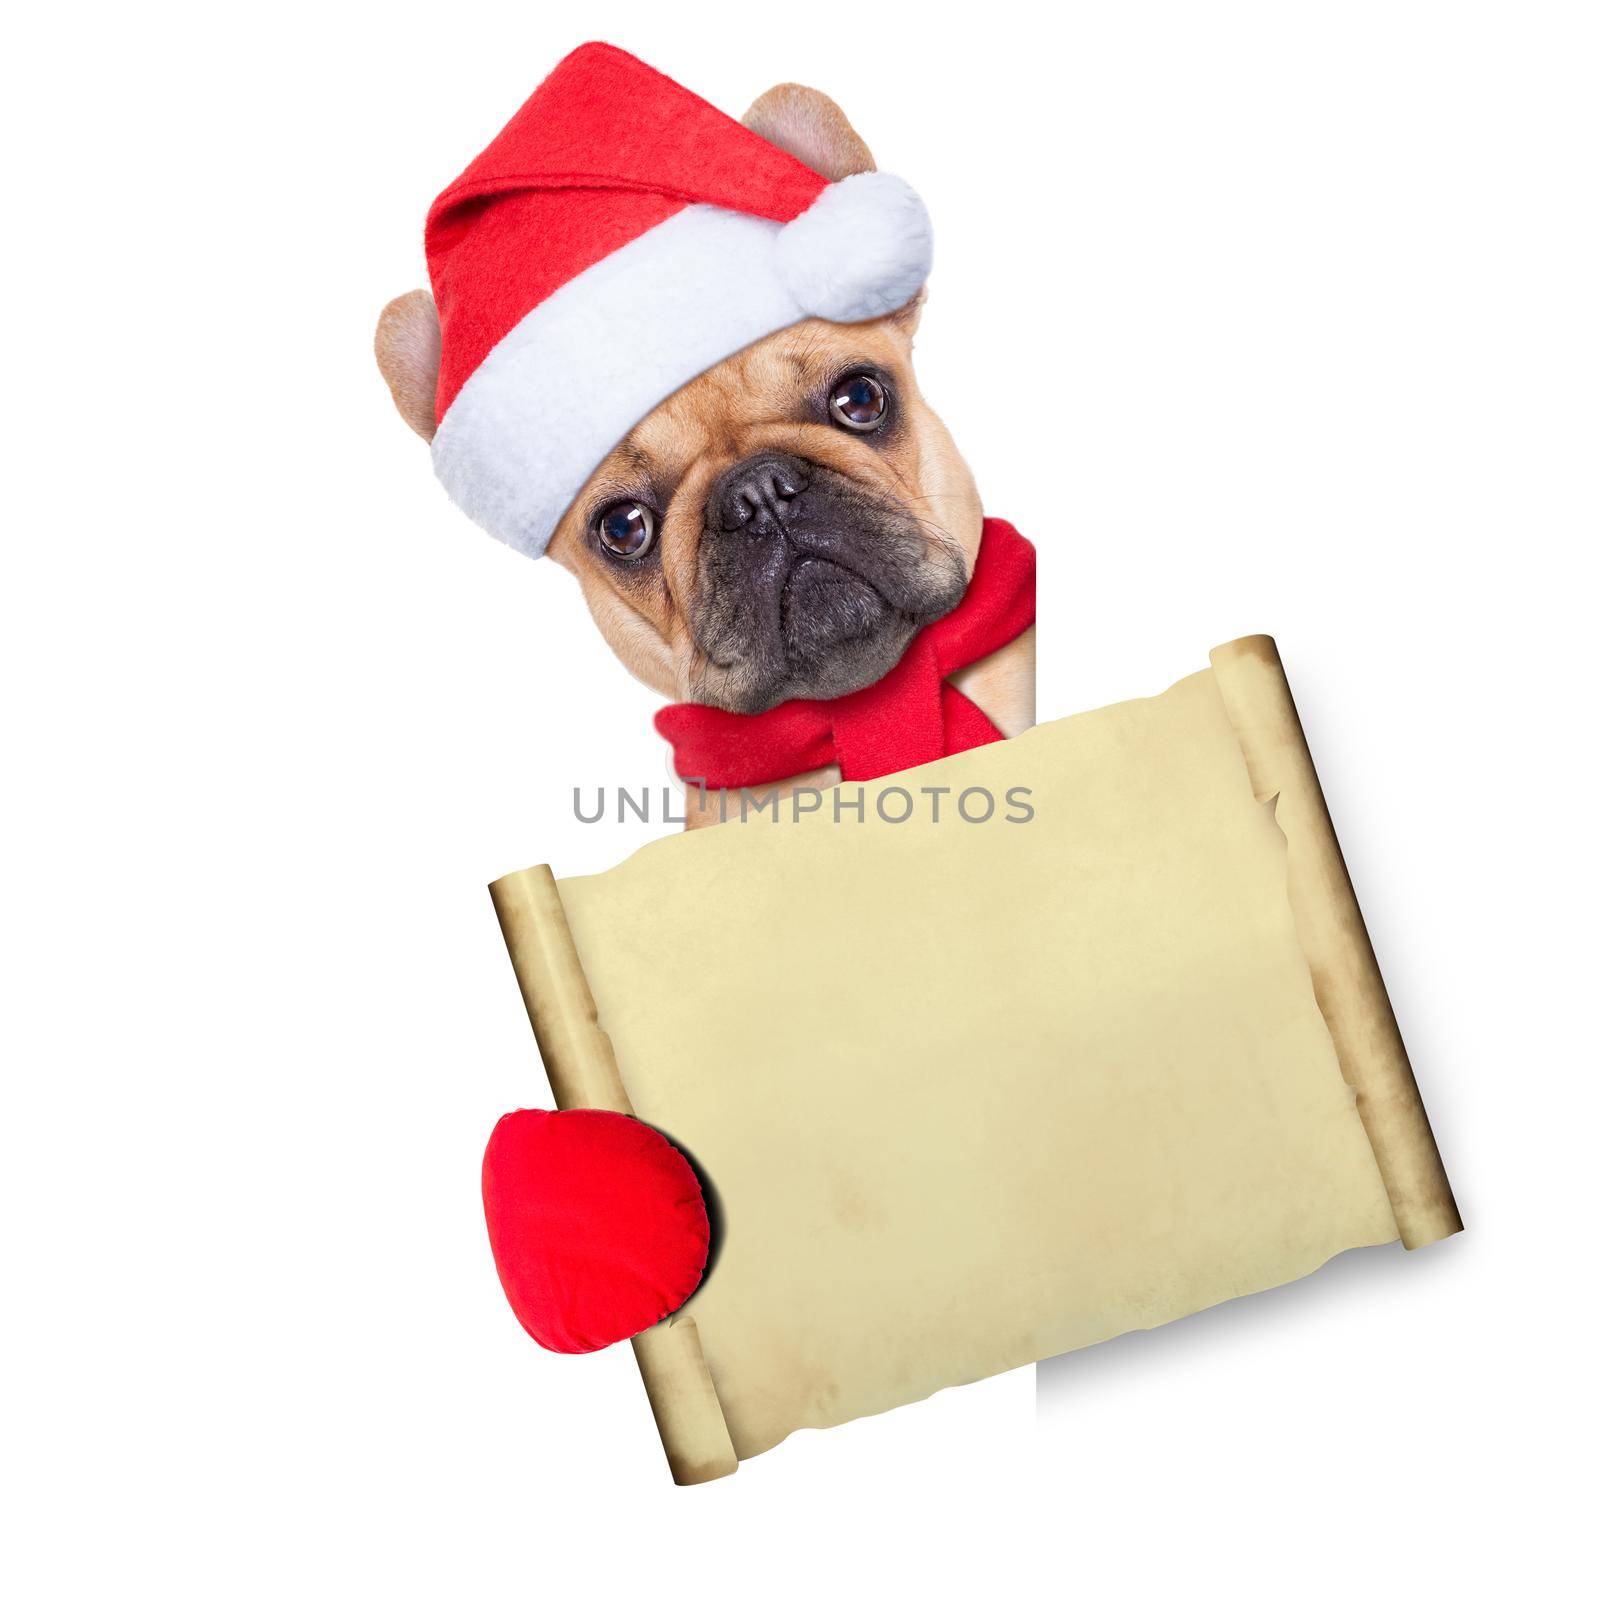 french bulldog dog dressed as santa claus behind a white empty banner or placard holding a papyrus or blank old paper